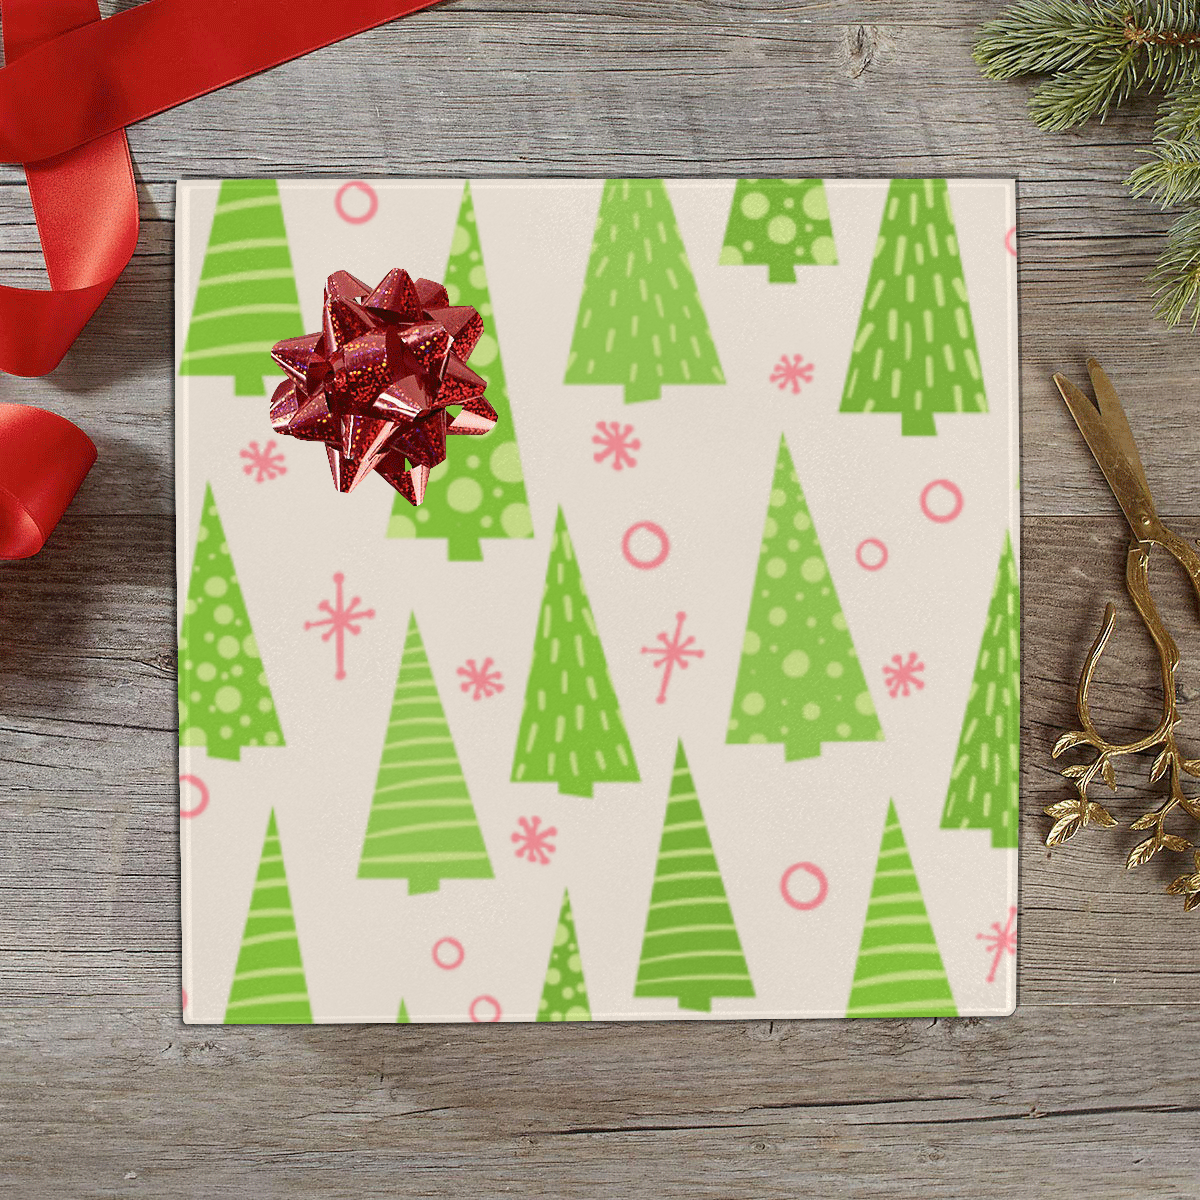 Christmas Trees Forest Gift Wrapping Paper 58"x 23" (5 Rolls)